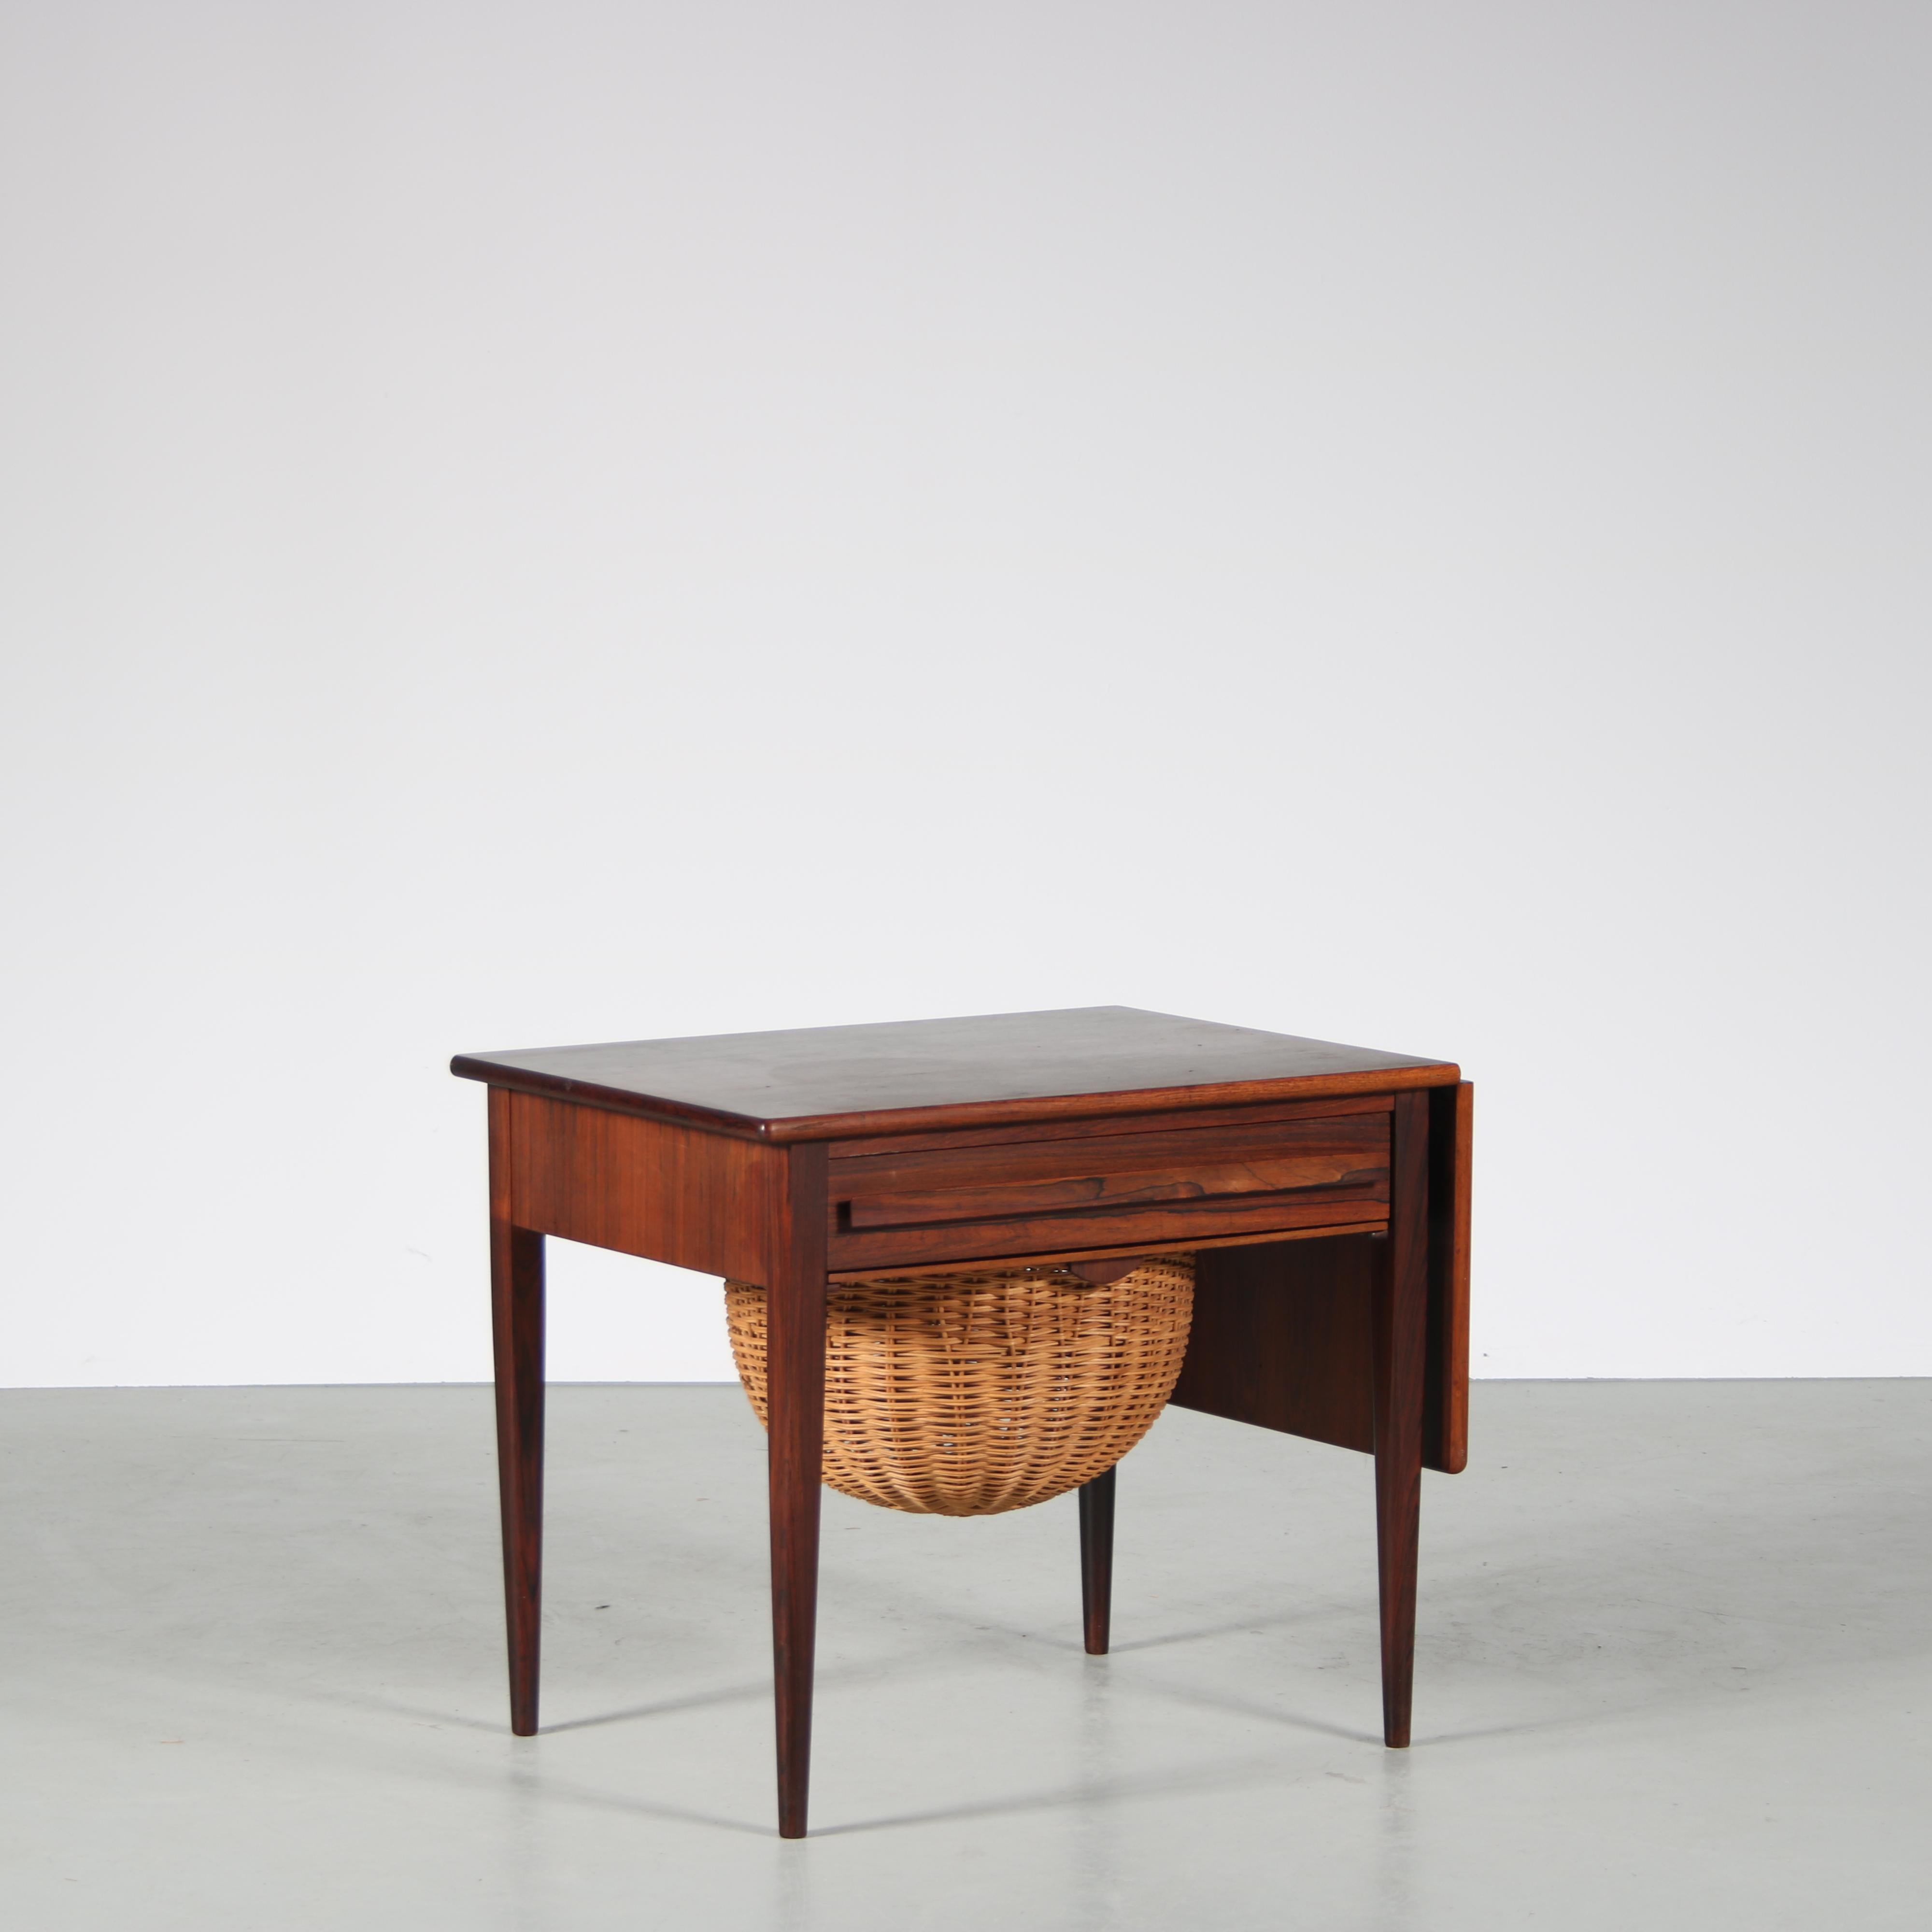 A beautiful sewing table, designed by Johannes Andersen and manufactured by CFC Silkeborg in Denmark around 1960.

The piece is made of high quality tropical hardwood, crafted with an impressive eye for detail and elegant shapes and finish. It has